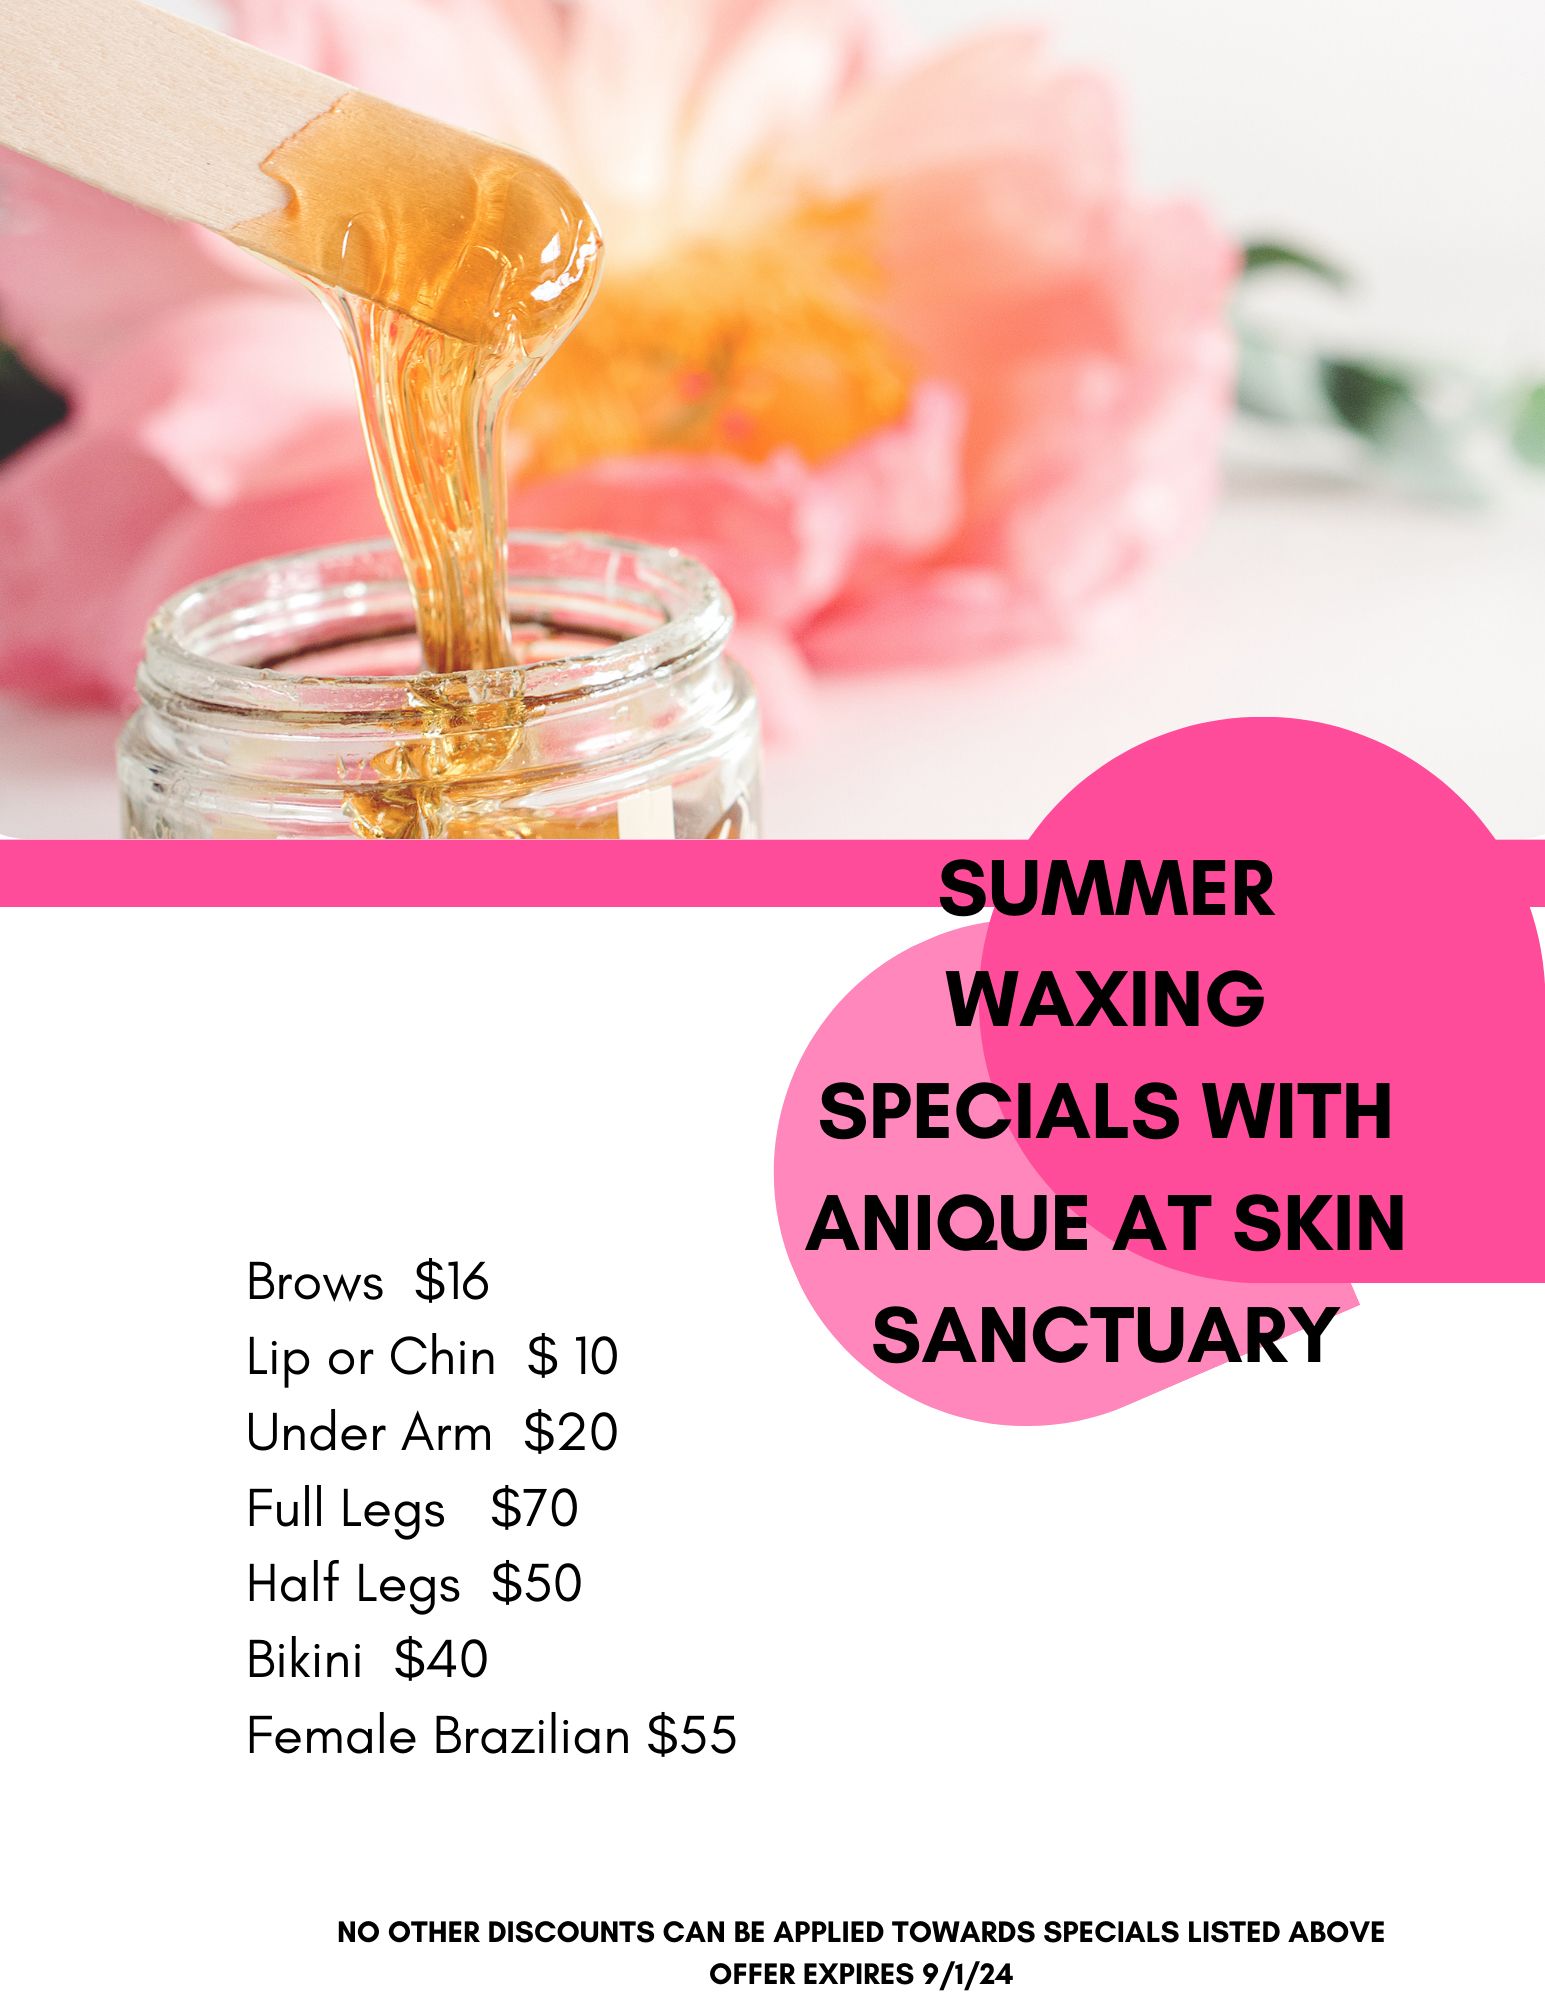 A poster for summer waxing specials with unique at Skin Sanctuary Spa.